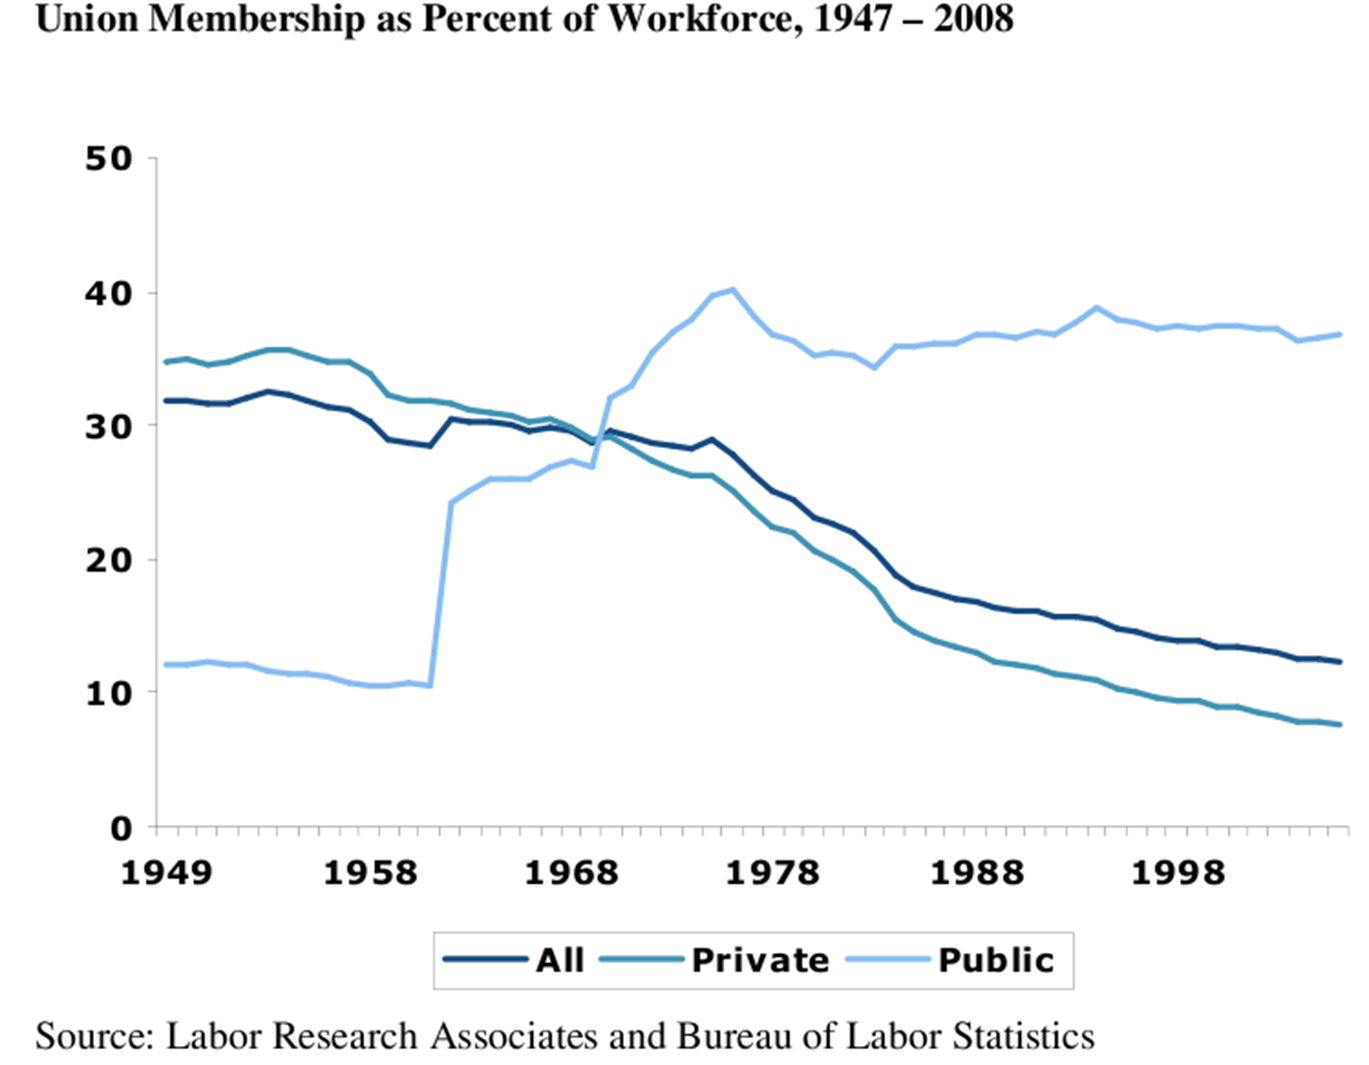 Because of their new focus and vitality, public sector union membership surged—just as private sector union membership began a steady decline. “From the early 1960s to today, public-sector union density rose from less than 12% to around 40%; meanwhile, from the mid-1950s to today, private-sector union density declined from more than 33% to less than 10%. Also, by the year 2000, about 40% of all union members were public workers.” (Joseph E. Slater, “Public-Sector Unionism,” in Encyclopedia of U.S. Labor and Working-Class History, ed. Eric Arnesen (New York: Routledge, 2007), 1143.)